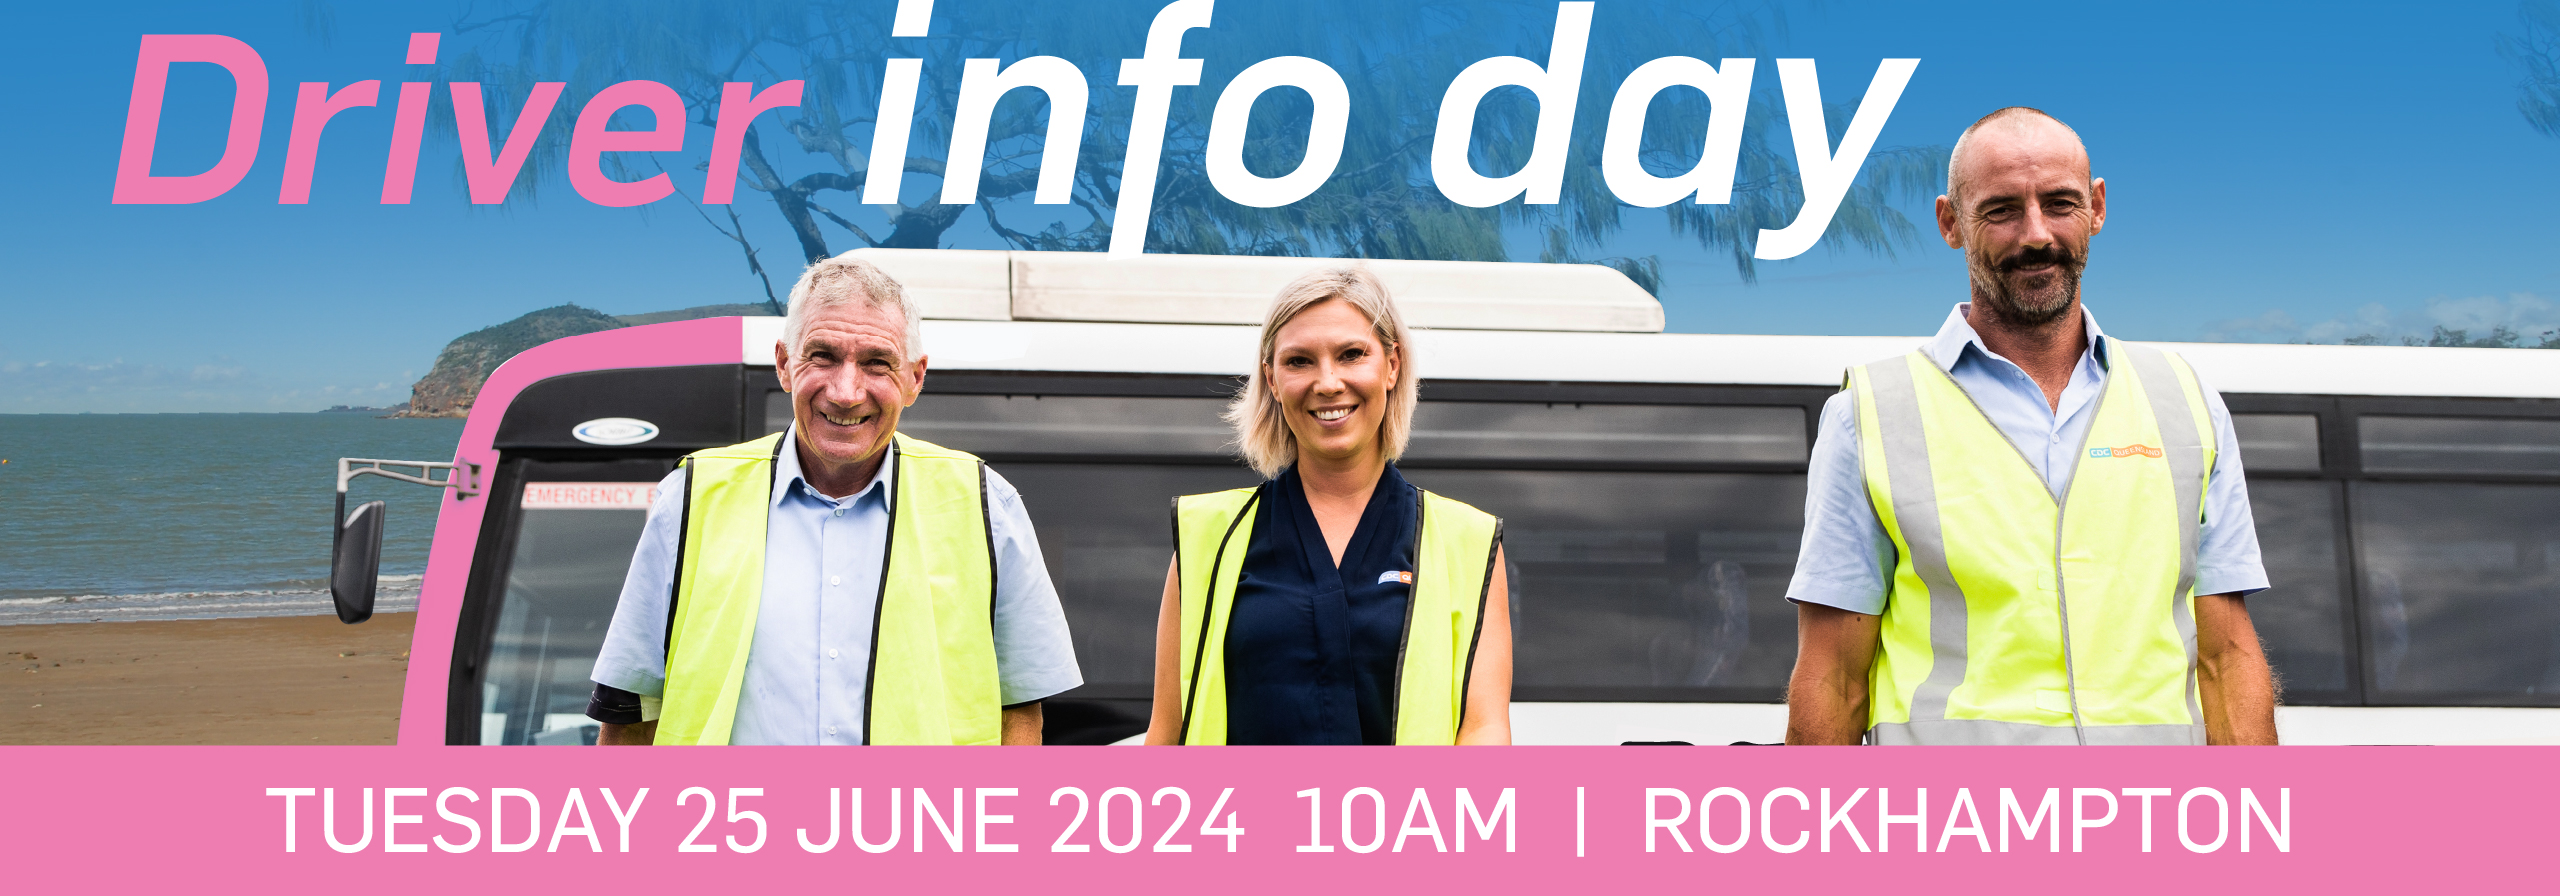 Register your interest for our Driver Info Day